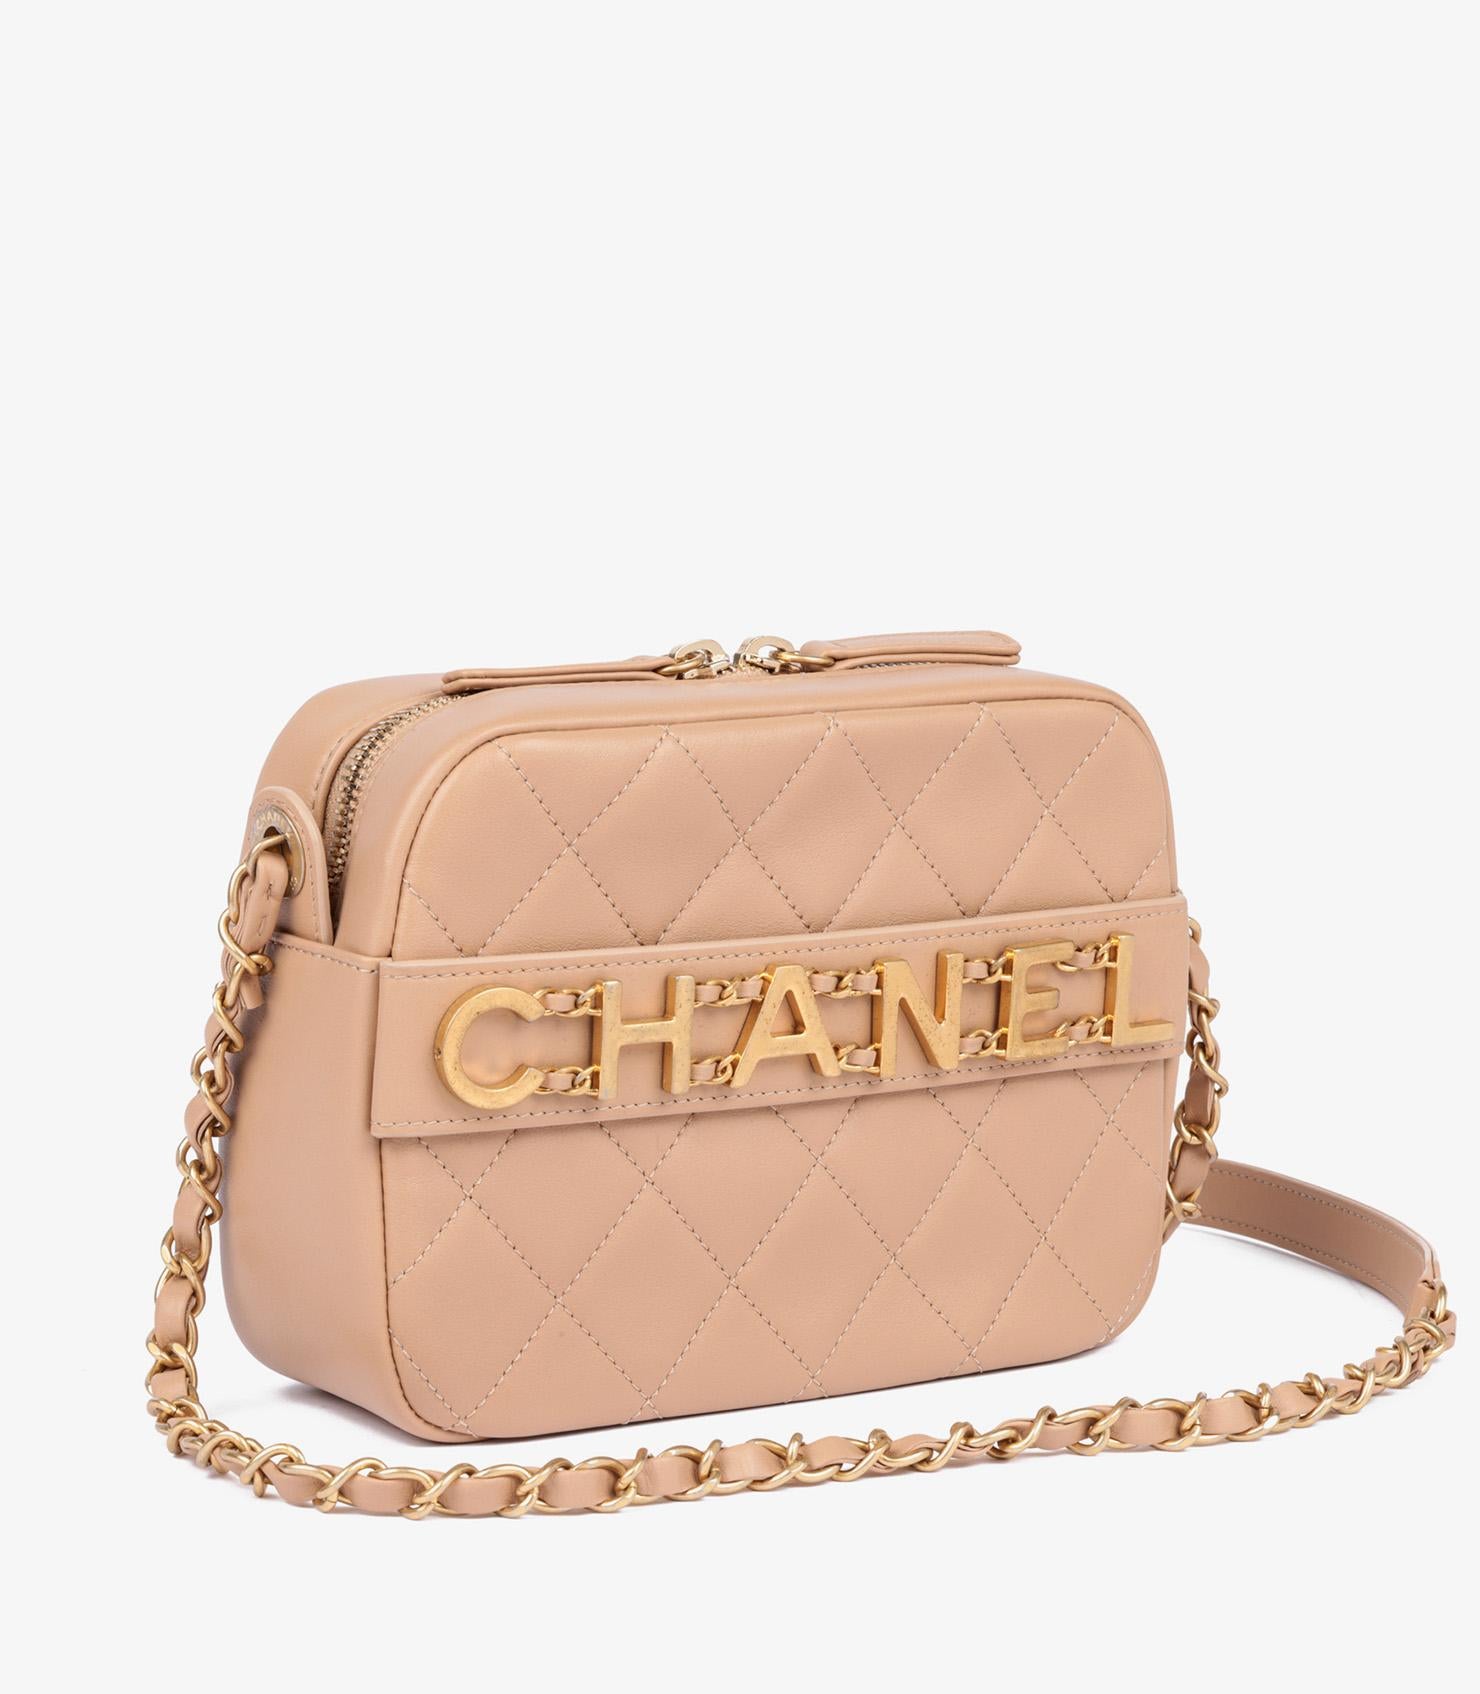 Chanel Beige Quilted Lambskin Enchained Camera Bag In Excellent Condition For Sale In Bishop's Stortford, Hertfordshire